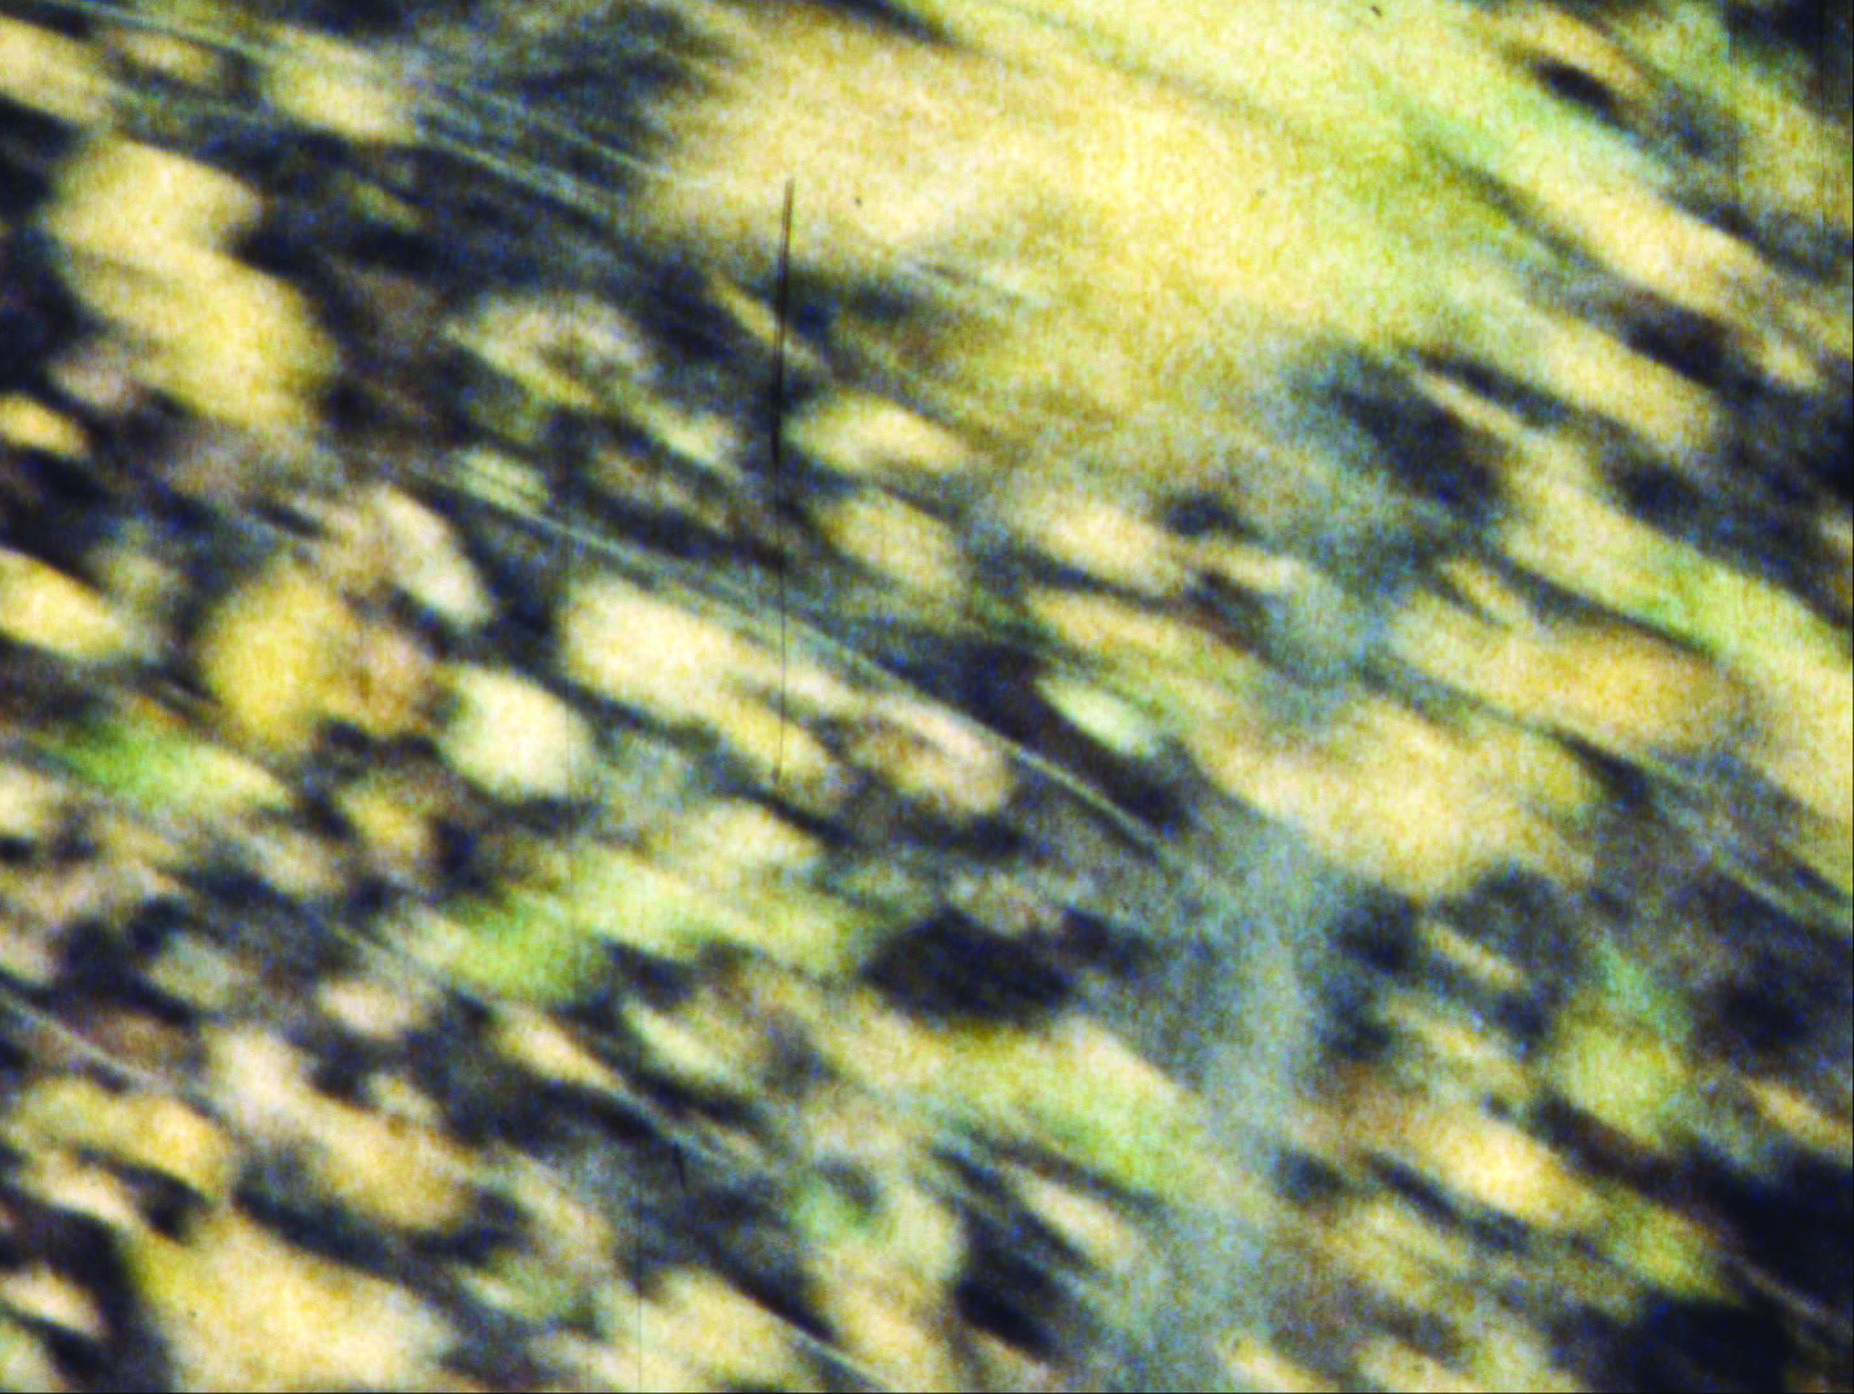 Barry Brown & Irene Proebsting, Field (still), 1997, Super 8 film converted to digital video, colour, sound, 6.00 mins, Latrobe Regional Gallery Collection, purchased 2016.